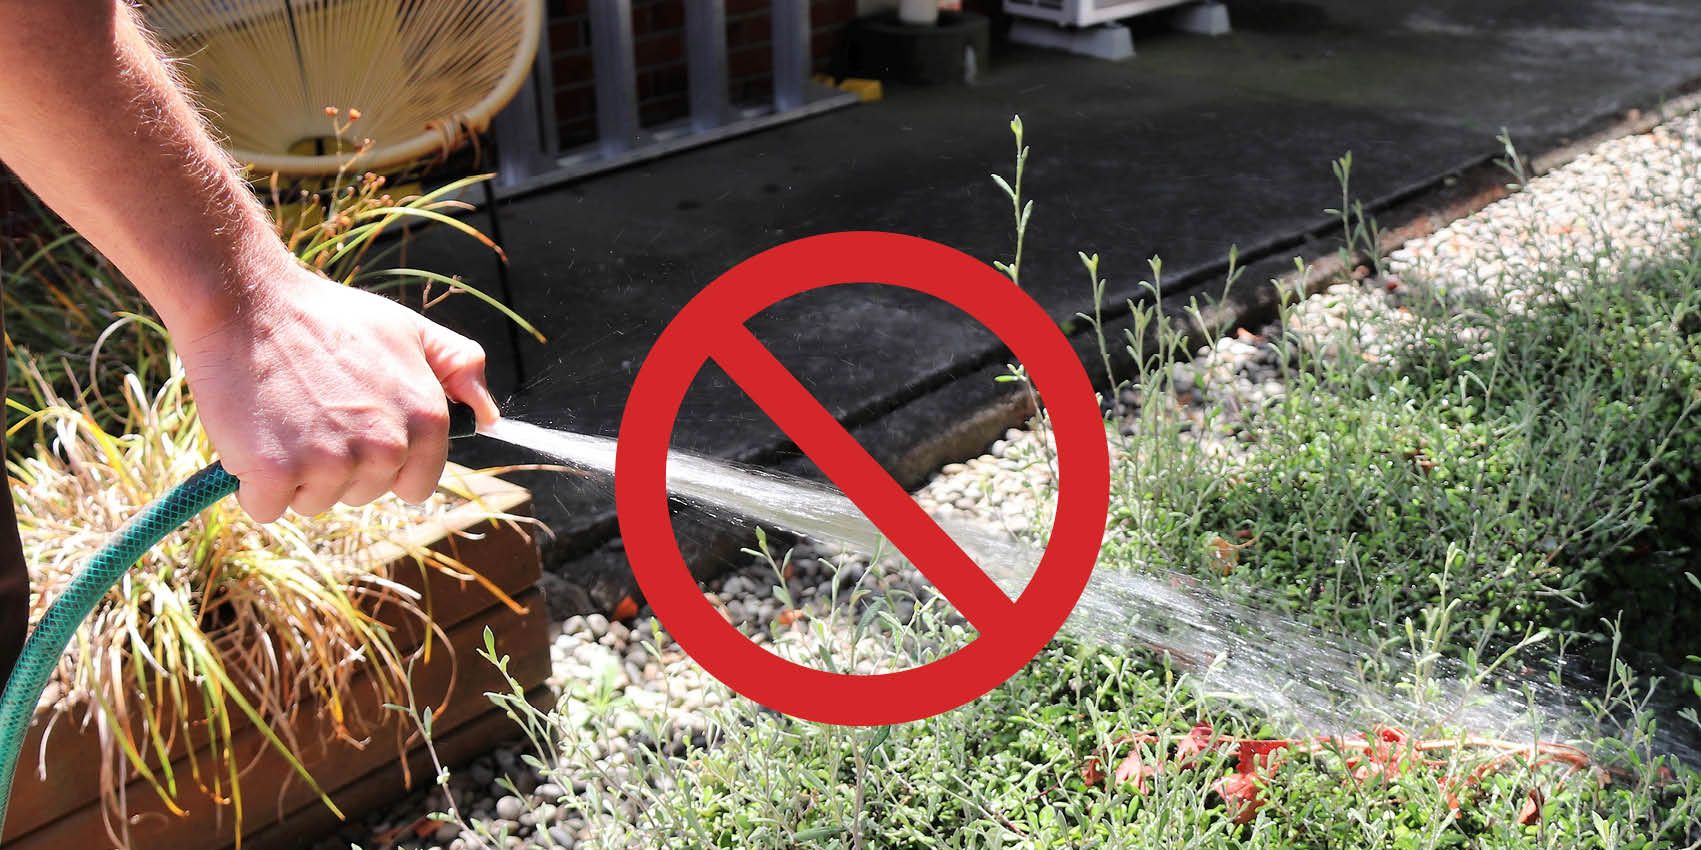 There is a complete ban on hand-held hosing and sprinklers, effective immediately, over the greater Te Puke area (Eastern Zone) of the Western Bay District. Note, this ban also applies to all properties that irrigate crops.